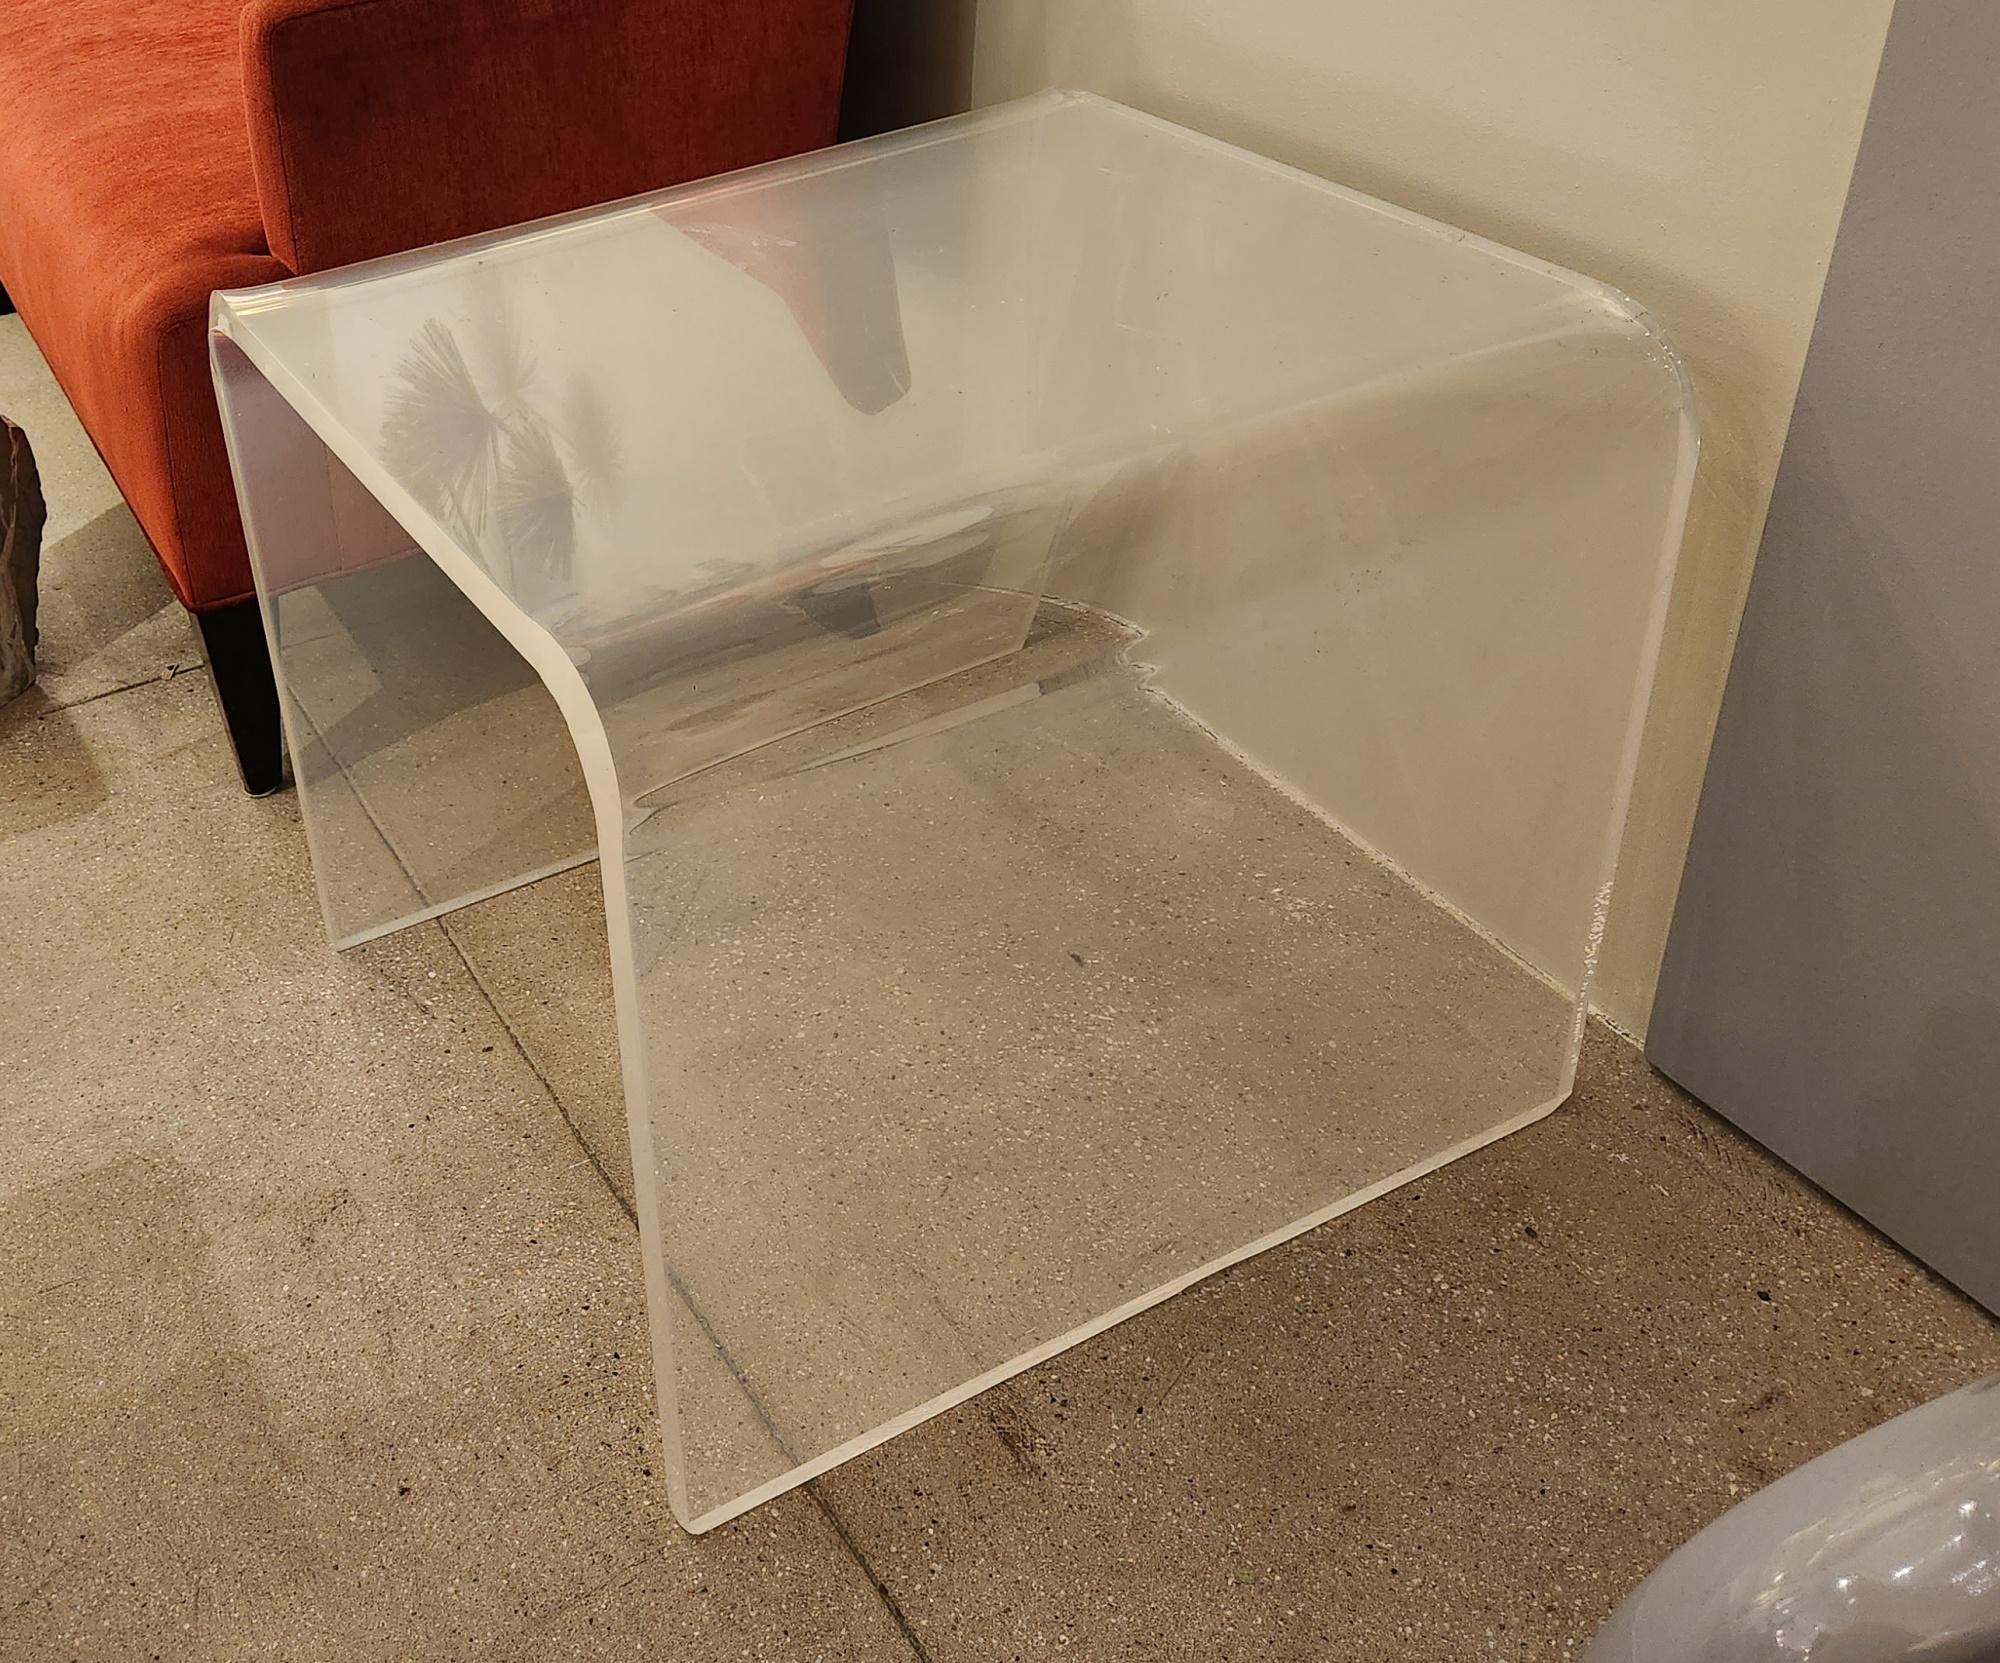 Lucite End Table In Excellent Condition For Sale In Stratford, CT